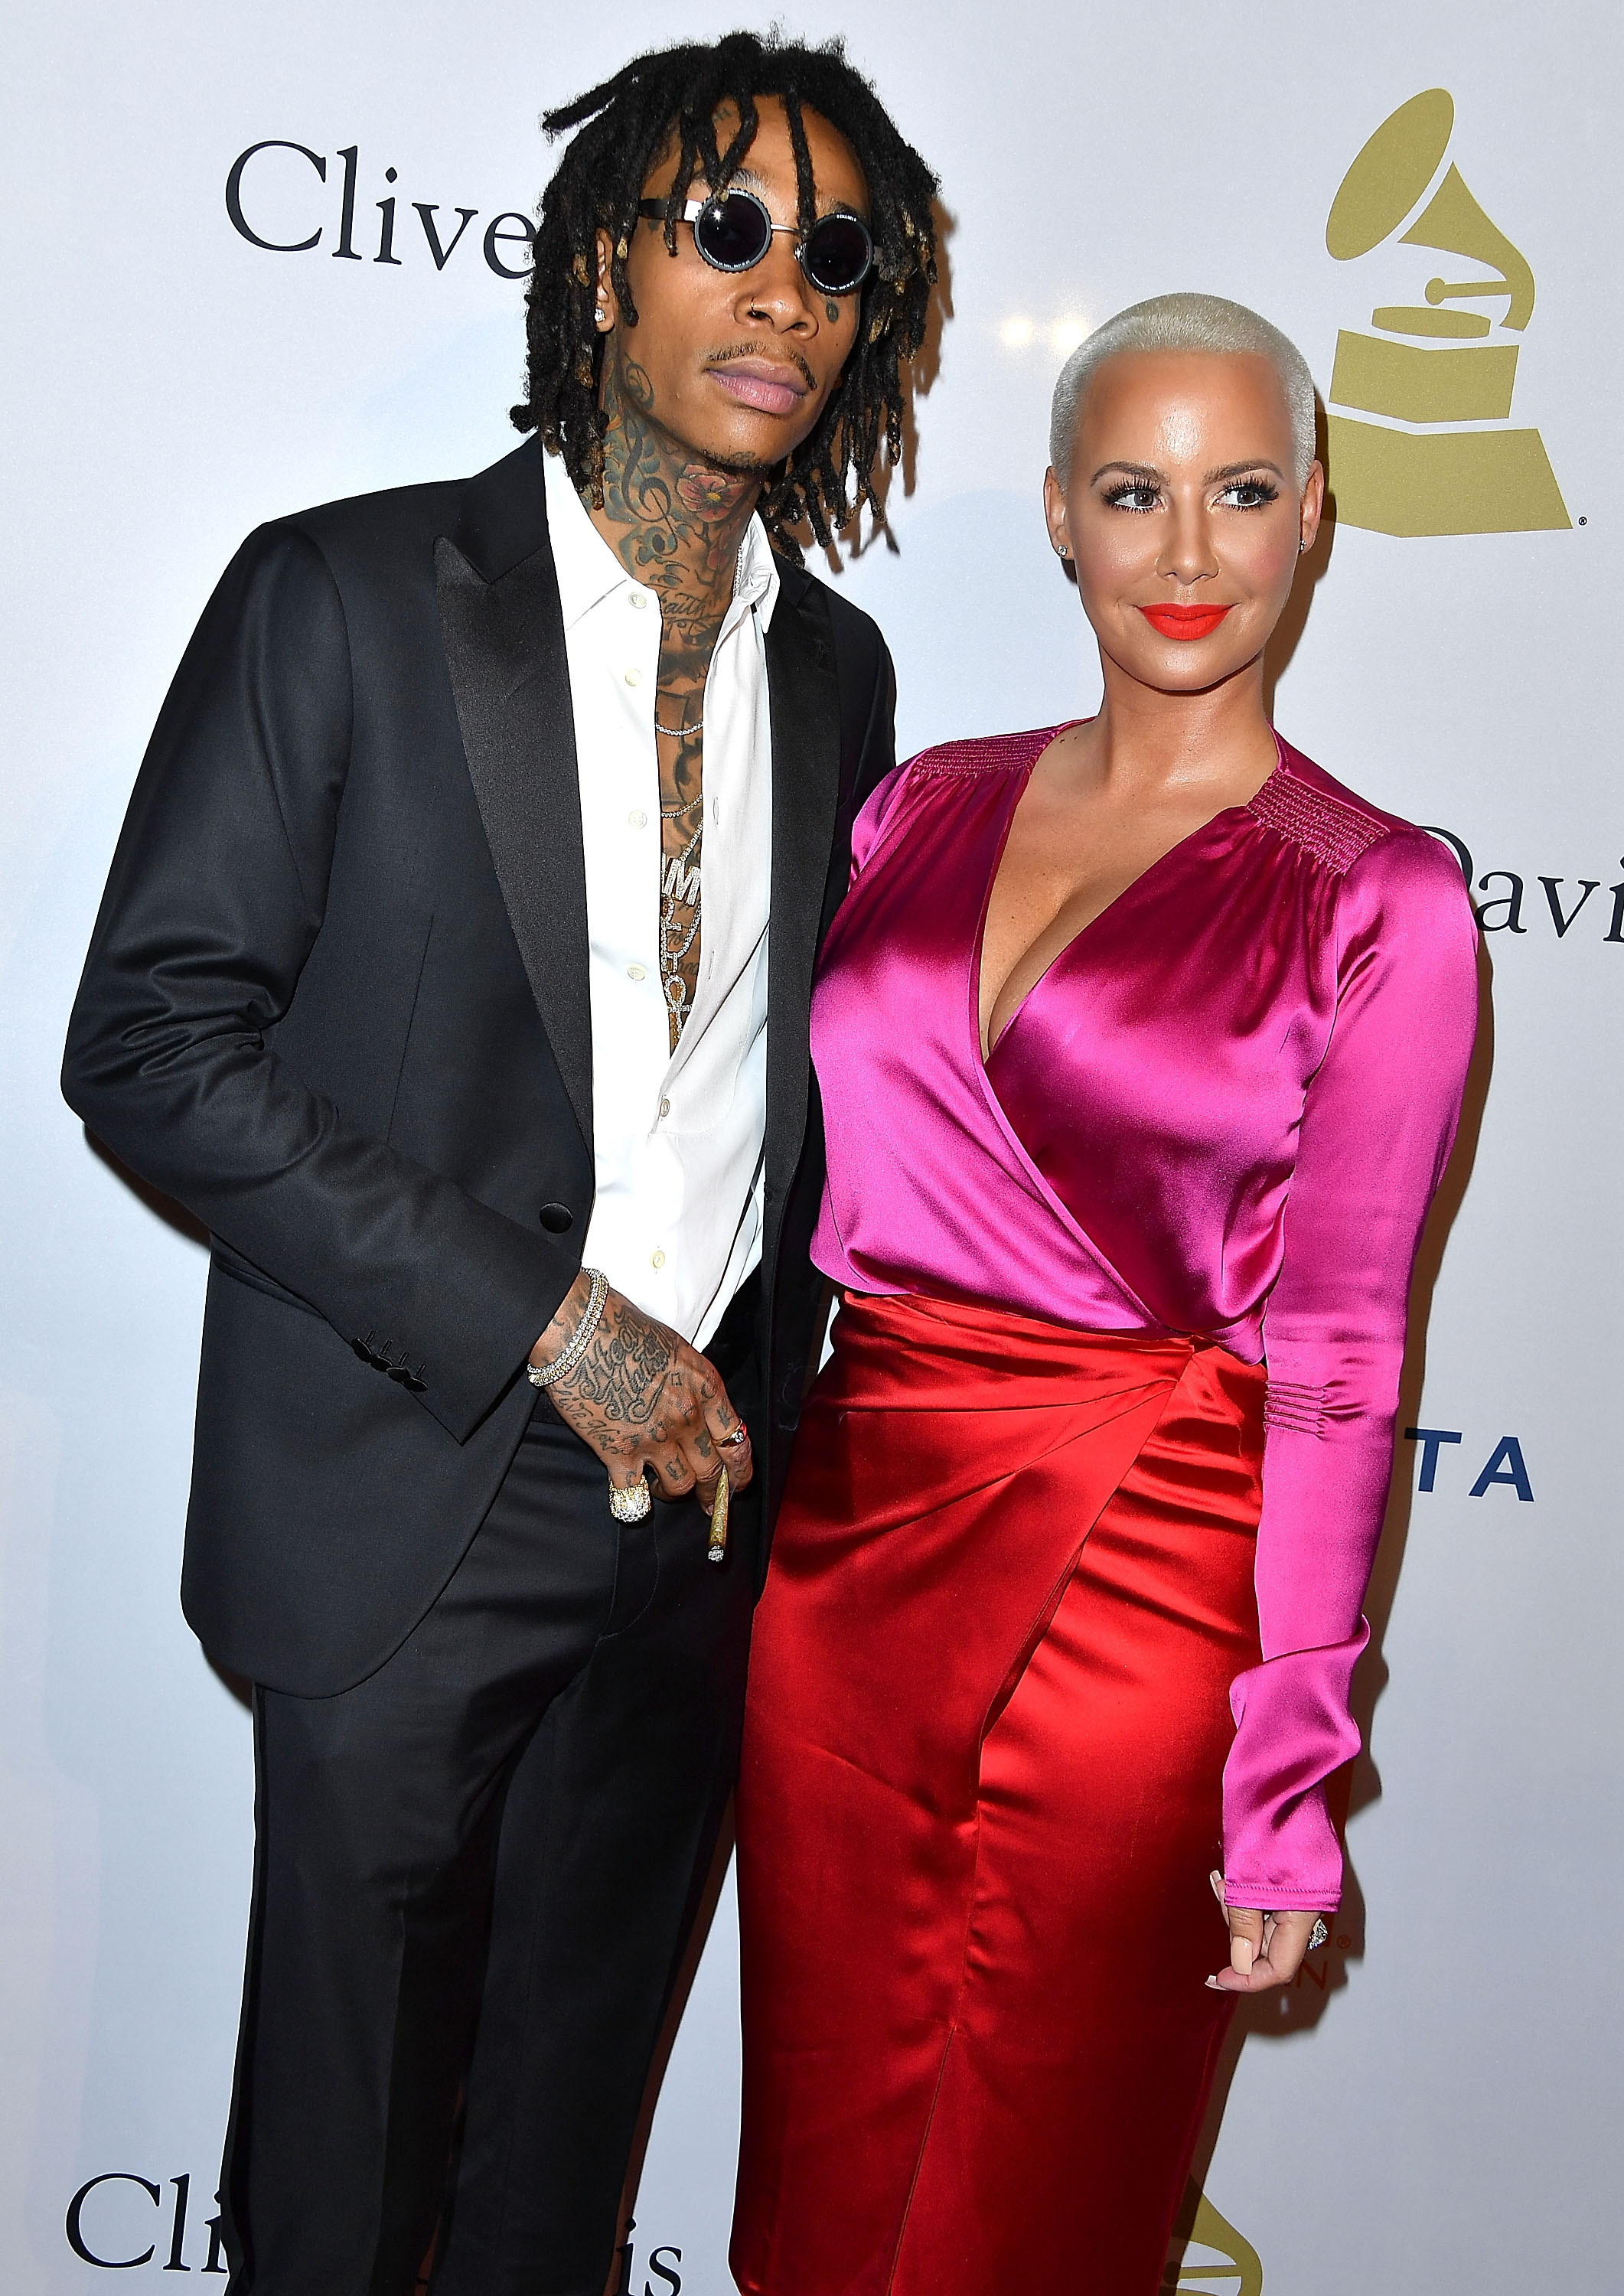 Amber Rose tells fans to STFU about her forehead tattoo